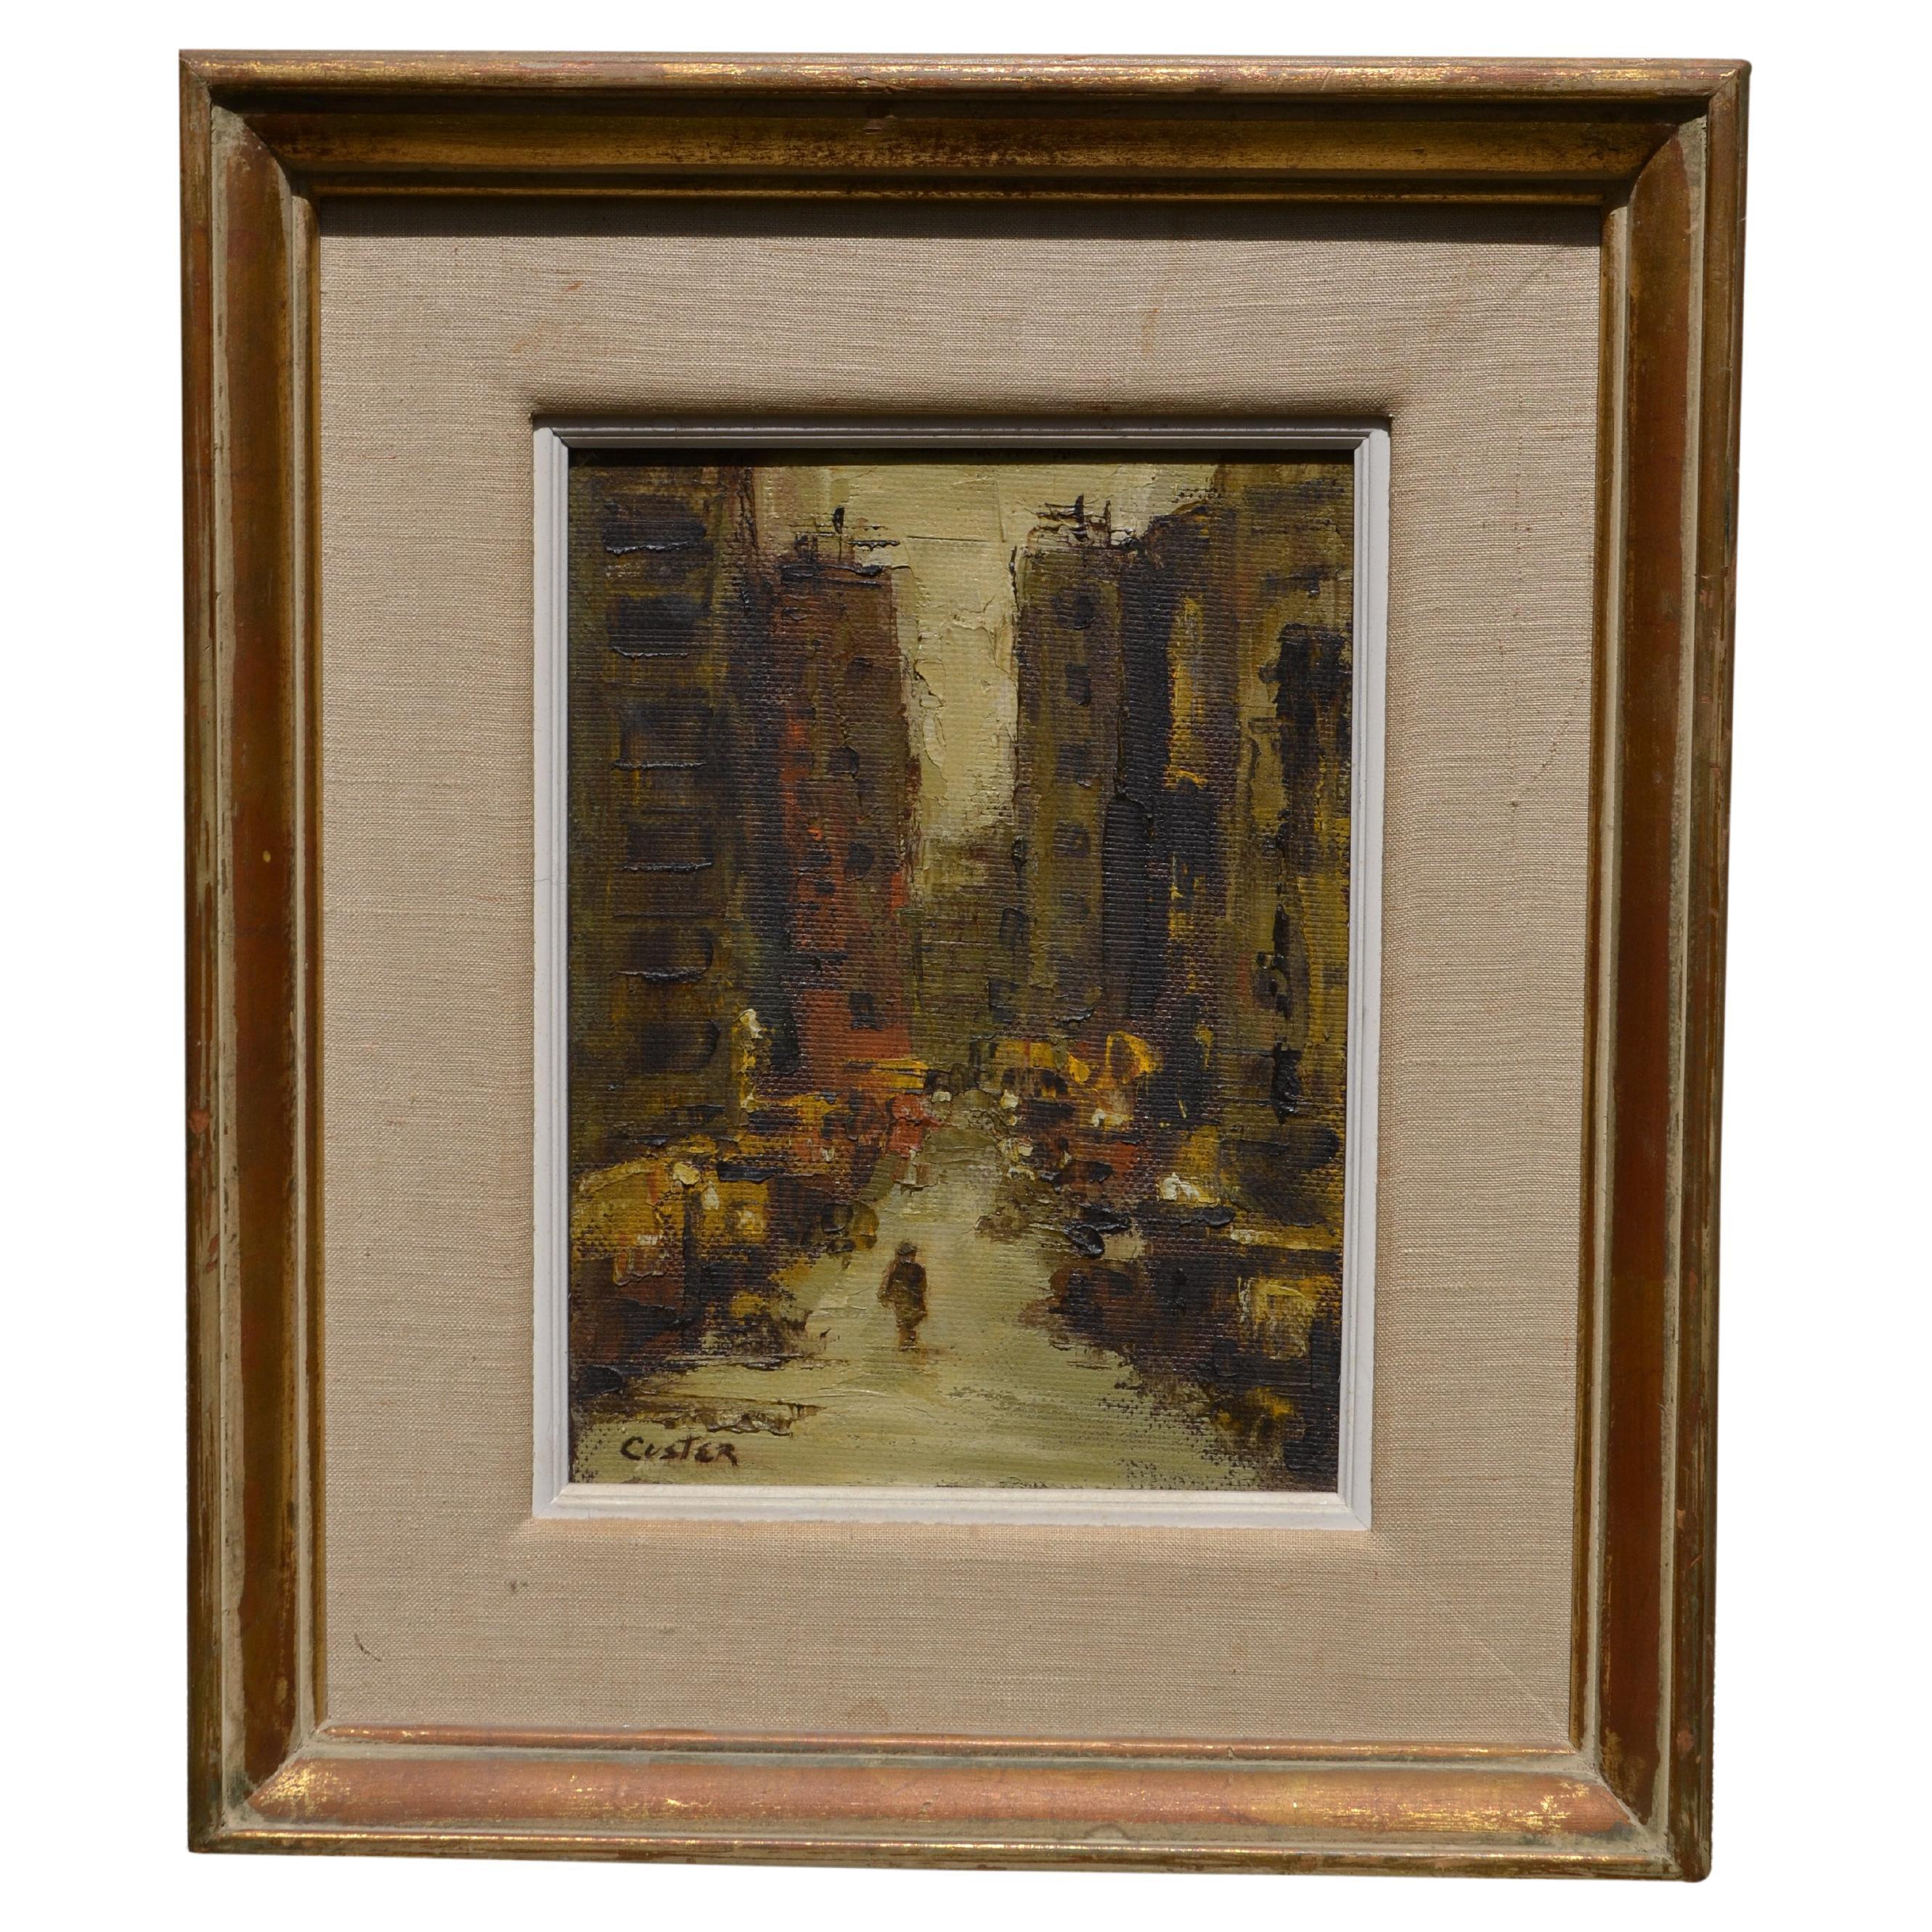 City Oil Painting by Custer